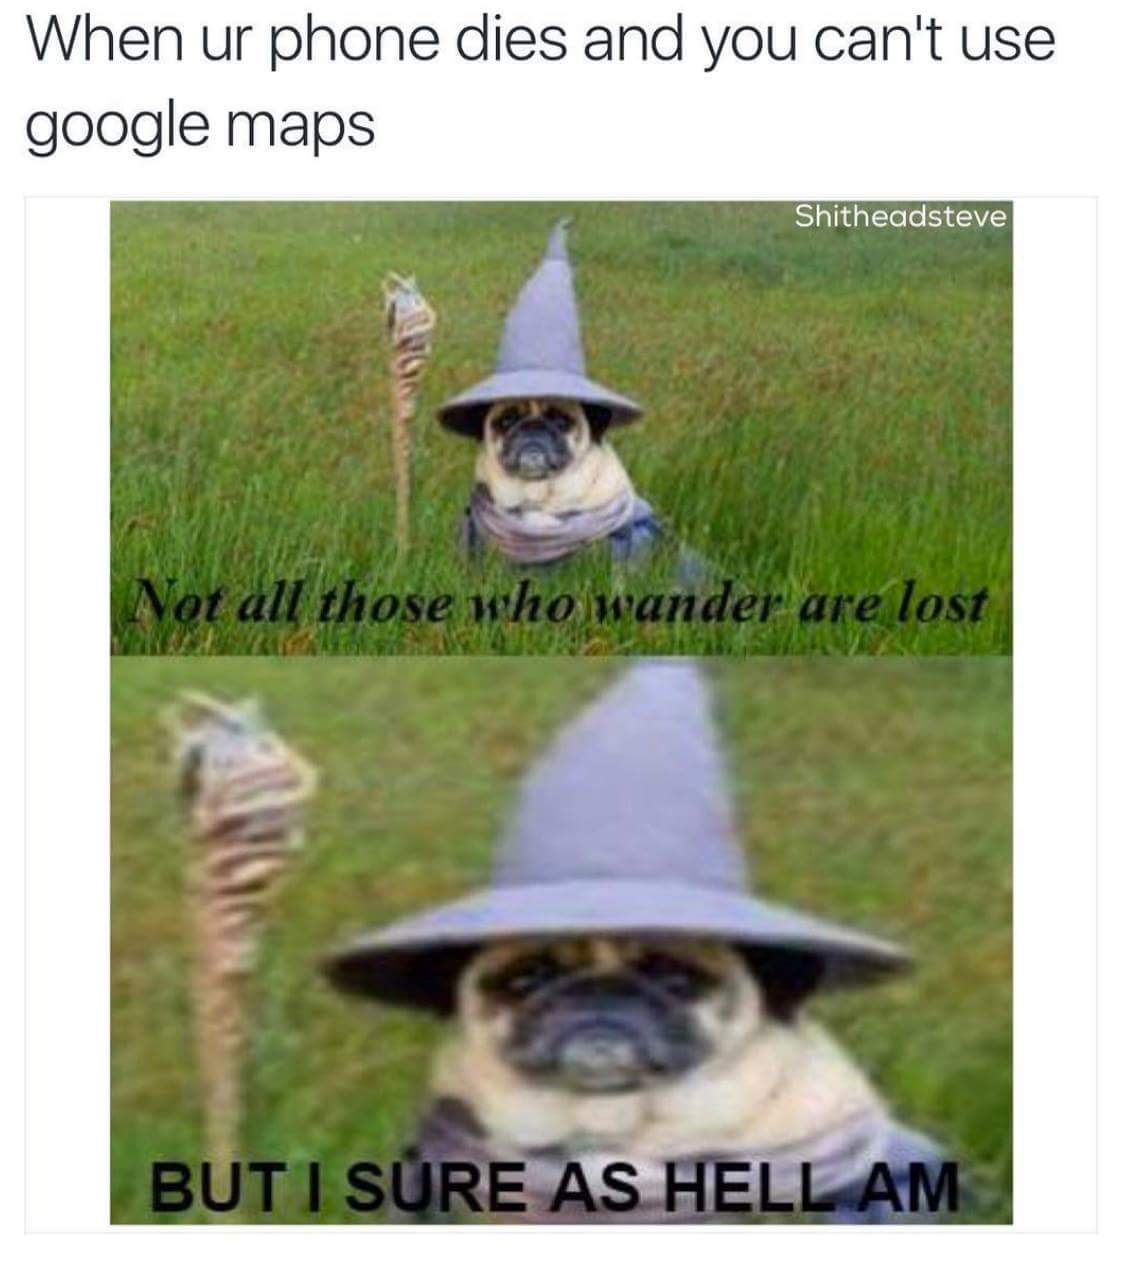 not all who wander are lost but - When ur phone dies and you can't use google maps Shitheadsteve Not all those who wander are lost But I Sure As Hell Am